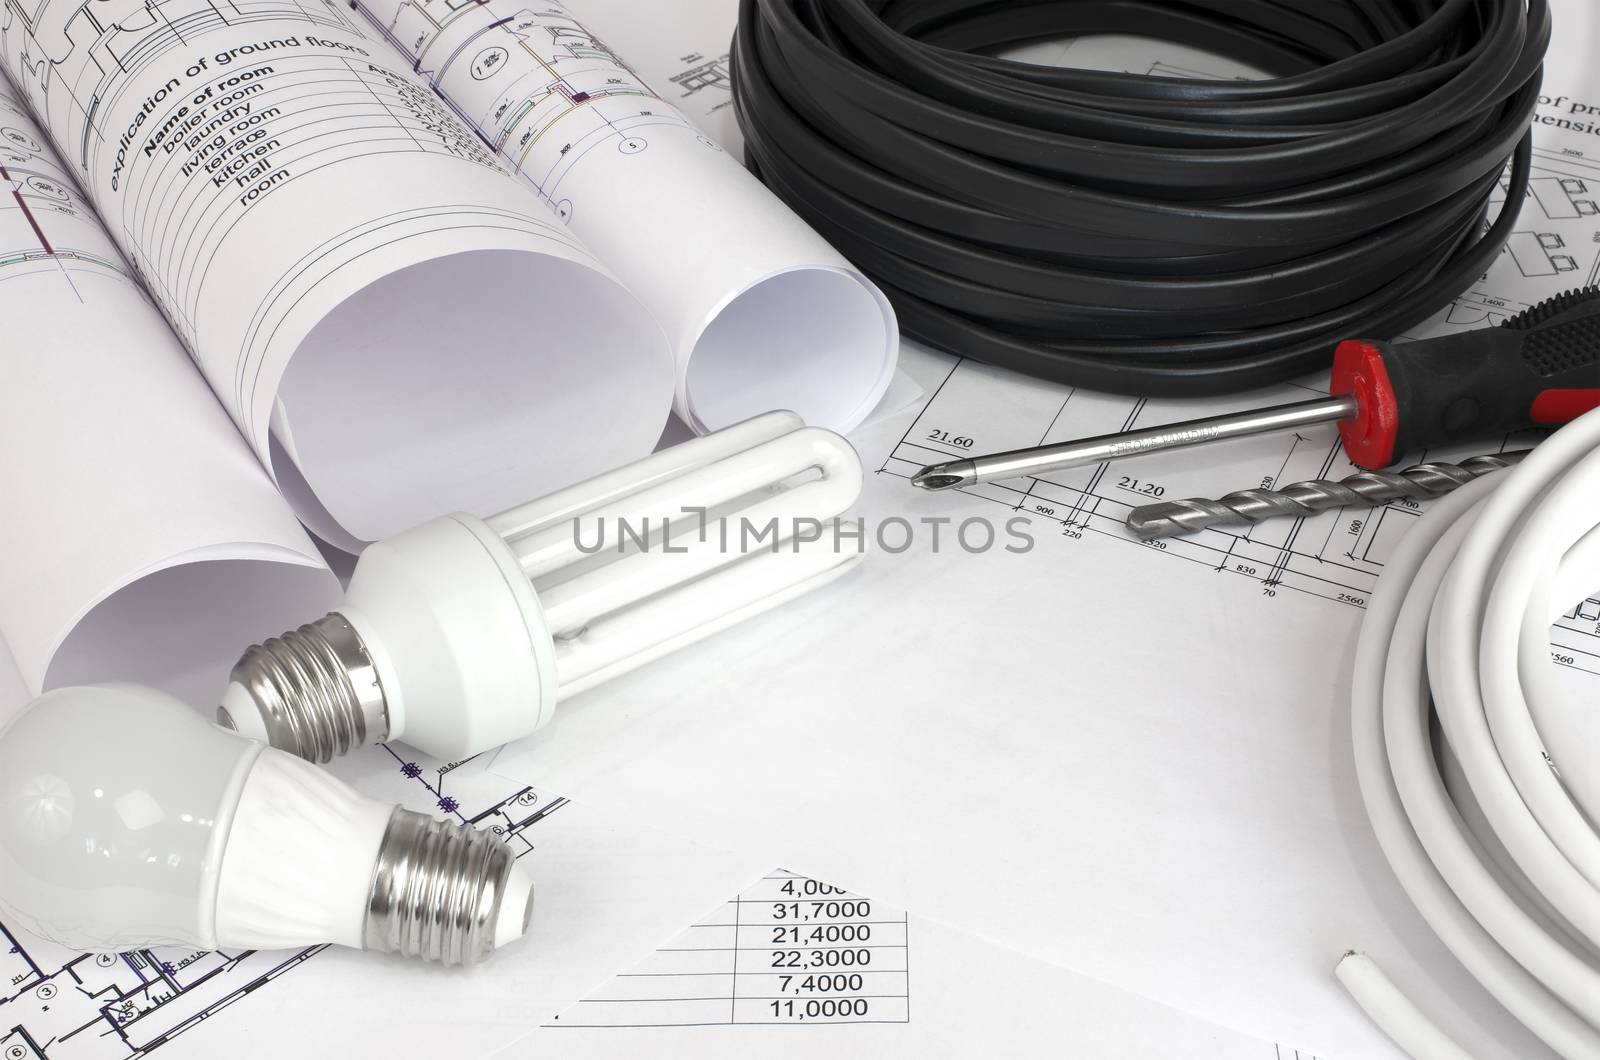 Electrical cable and bulbs on the construction drawings. Repair and construction of electric systems